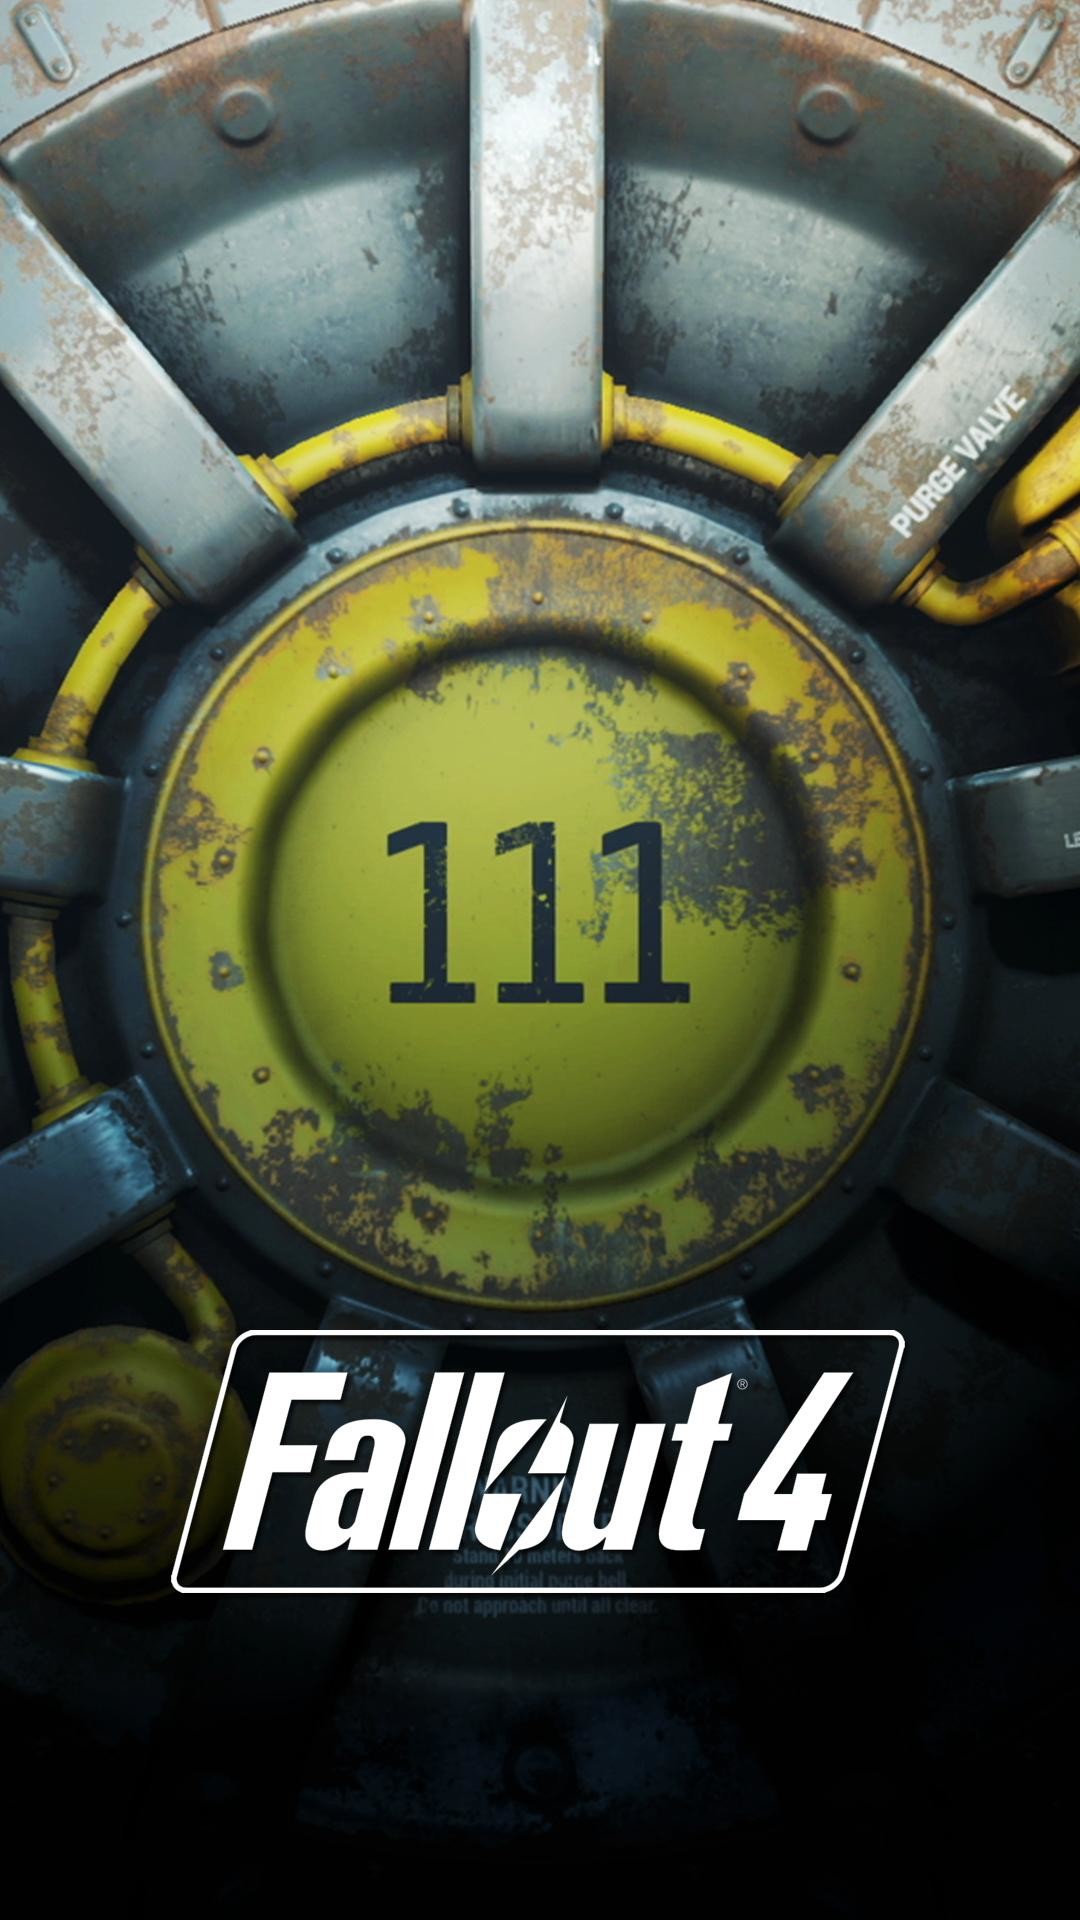 1080x1920 Fallout 4 nieuws: Prachtige iPhone- en Android wallpapers voor Fallout .